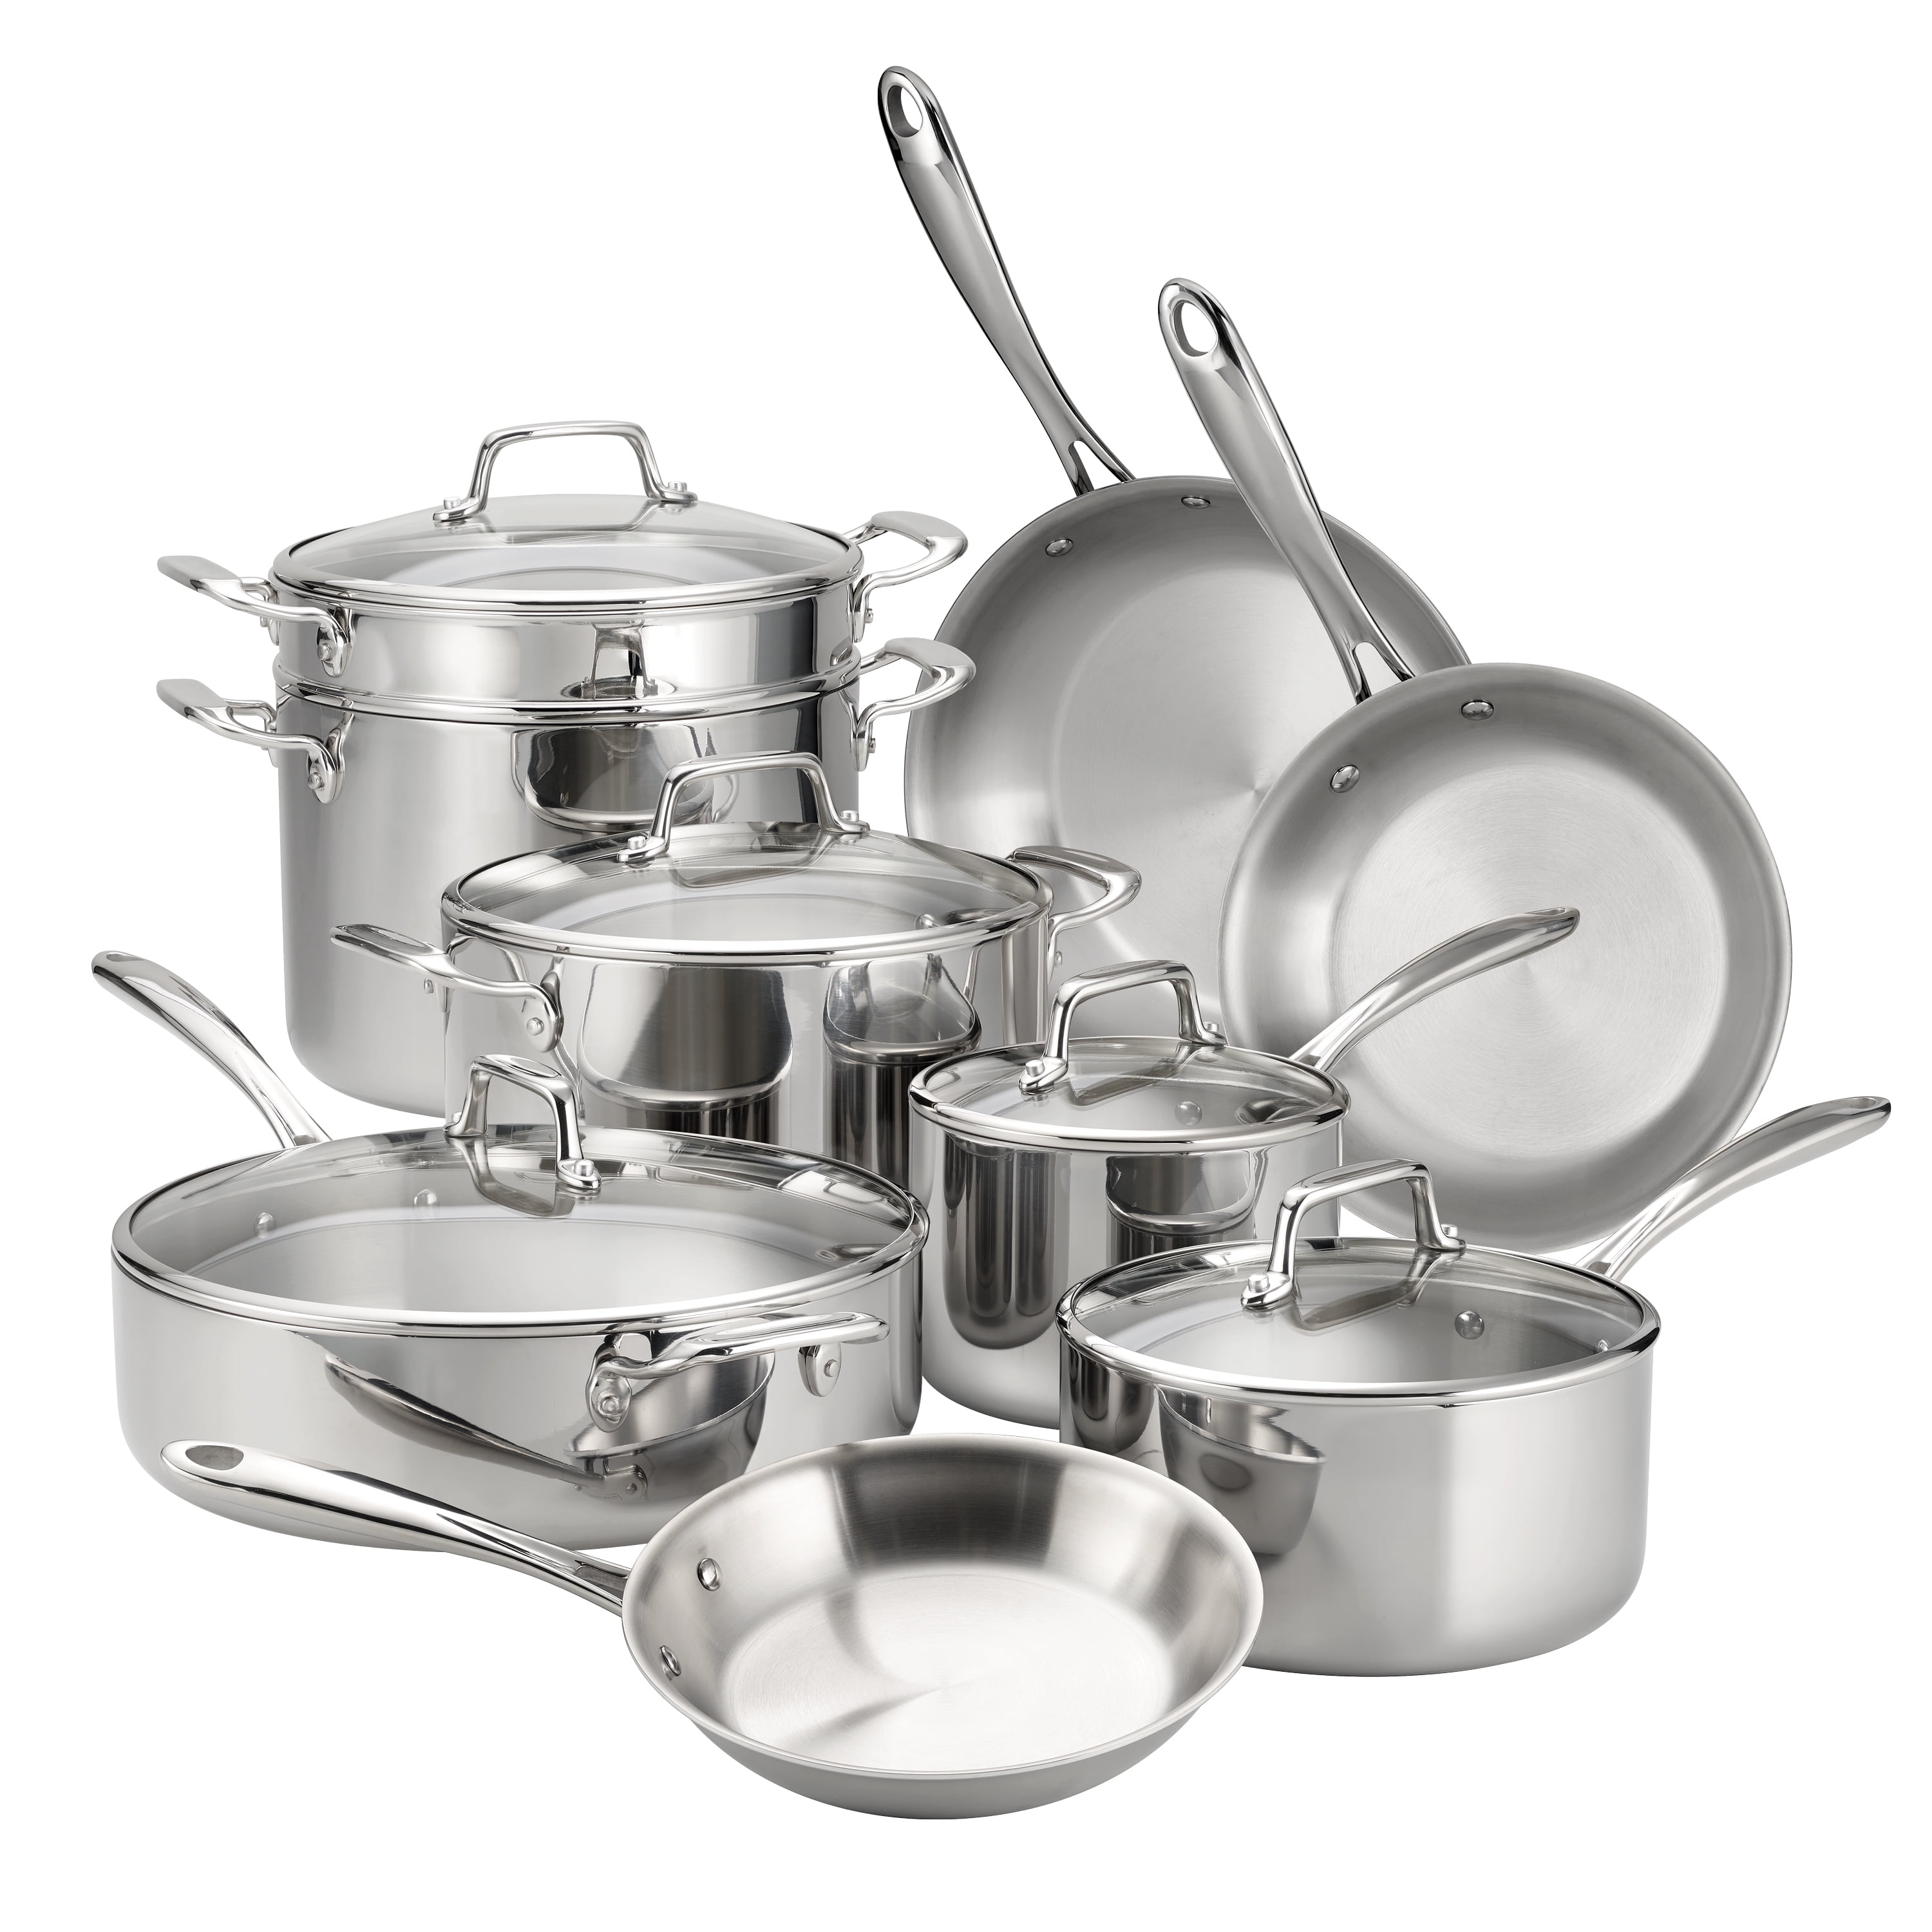 Tramontina 14-Piece Tri-Ply Clad Stainless Steel Cookware Set